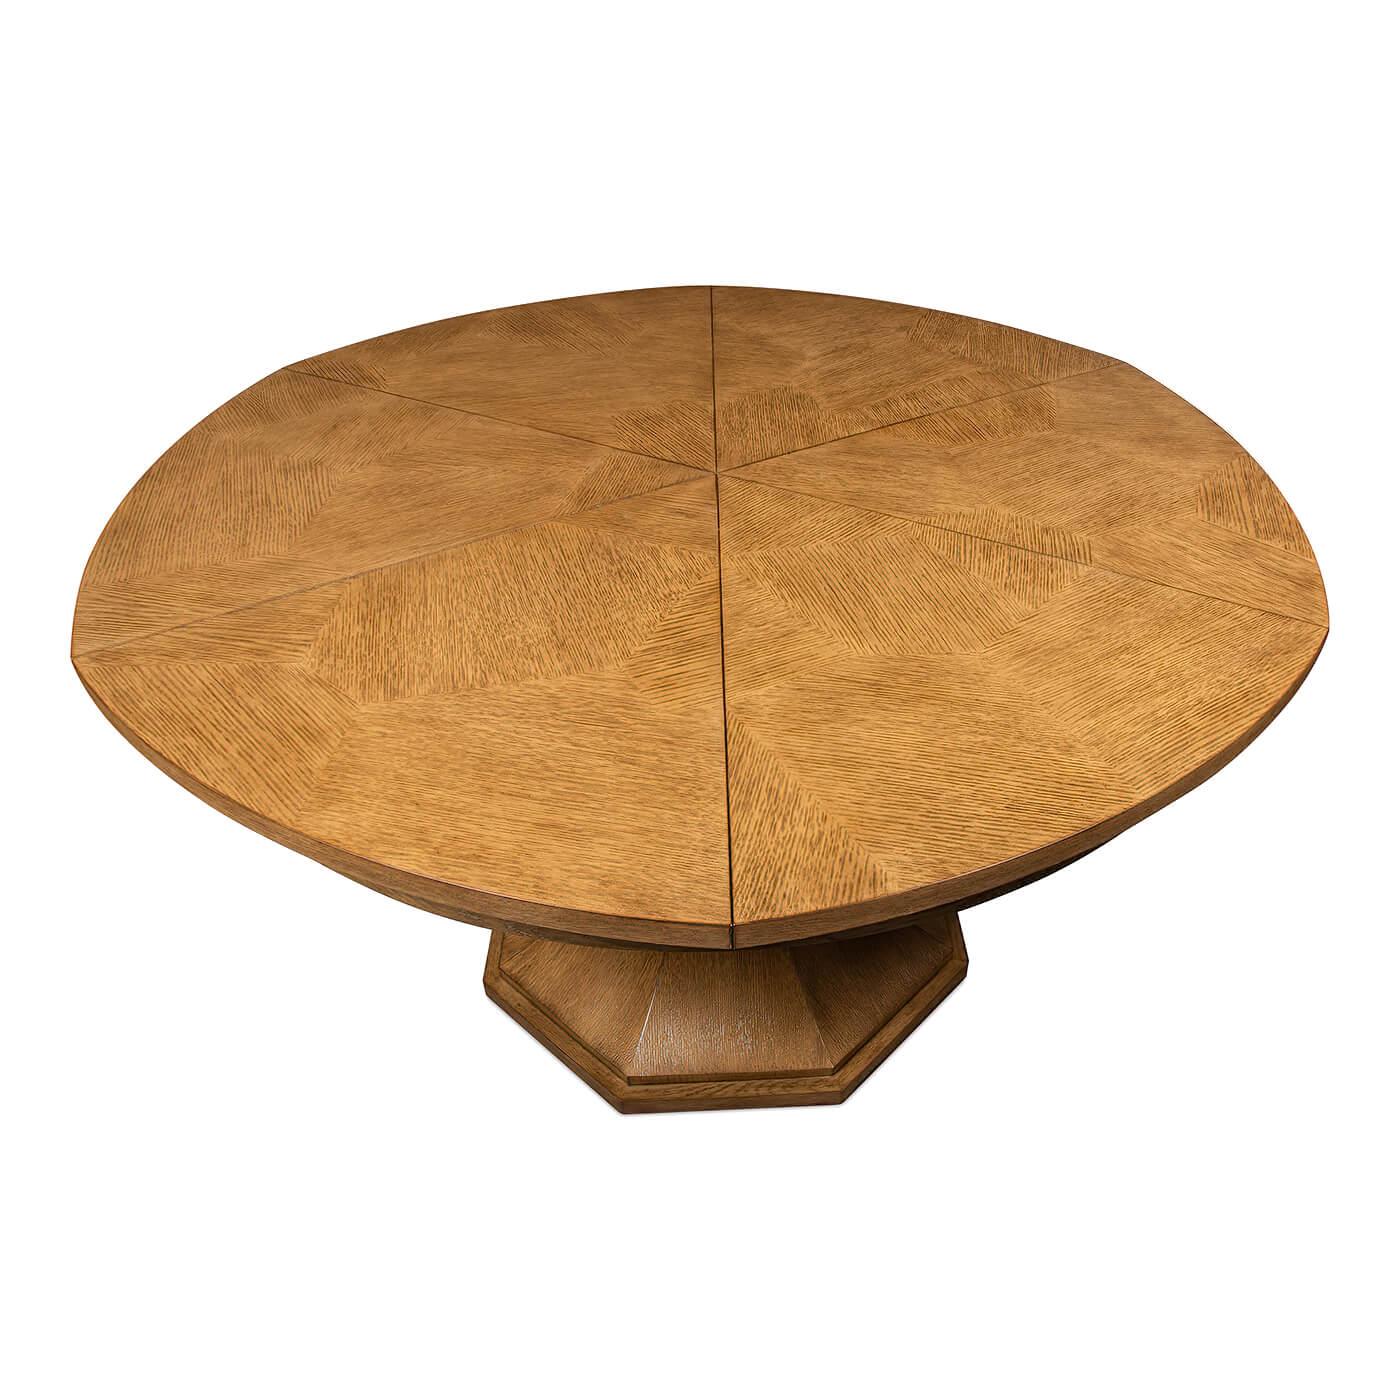 Modern Round Dining Table, Oak Finish In New Condition For Sale In Westwood, NJ